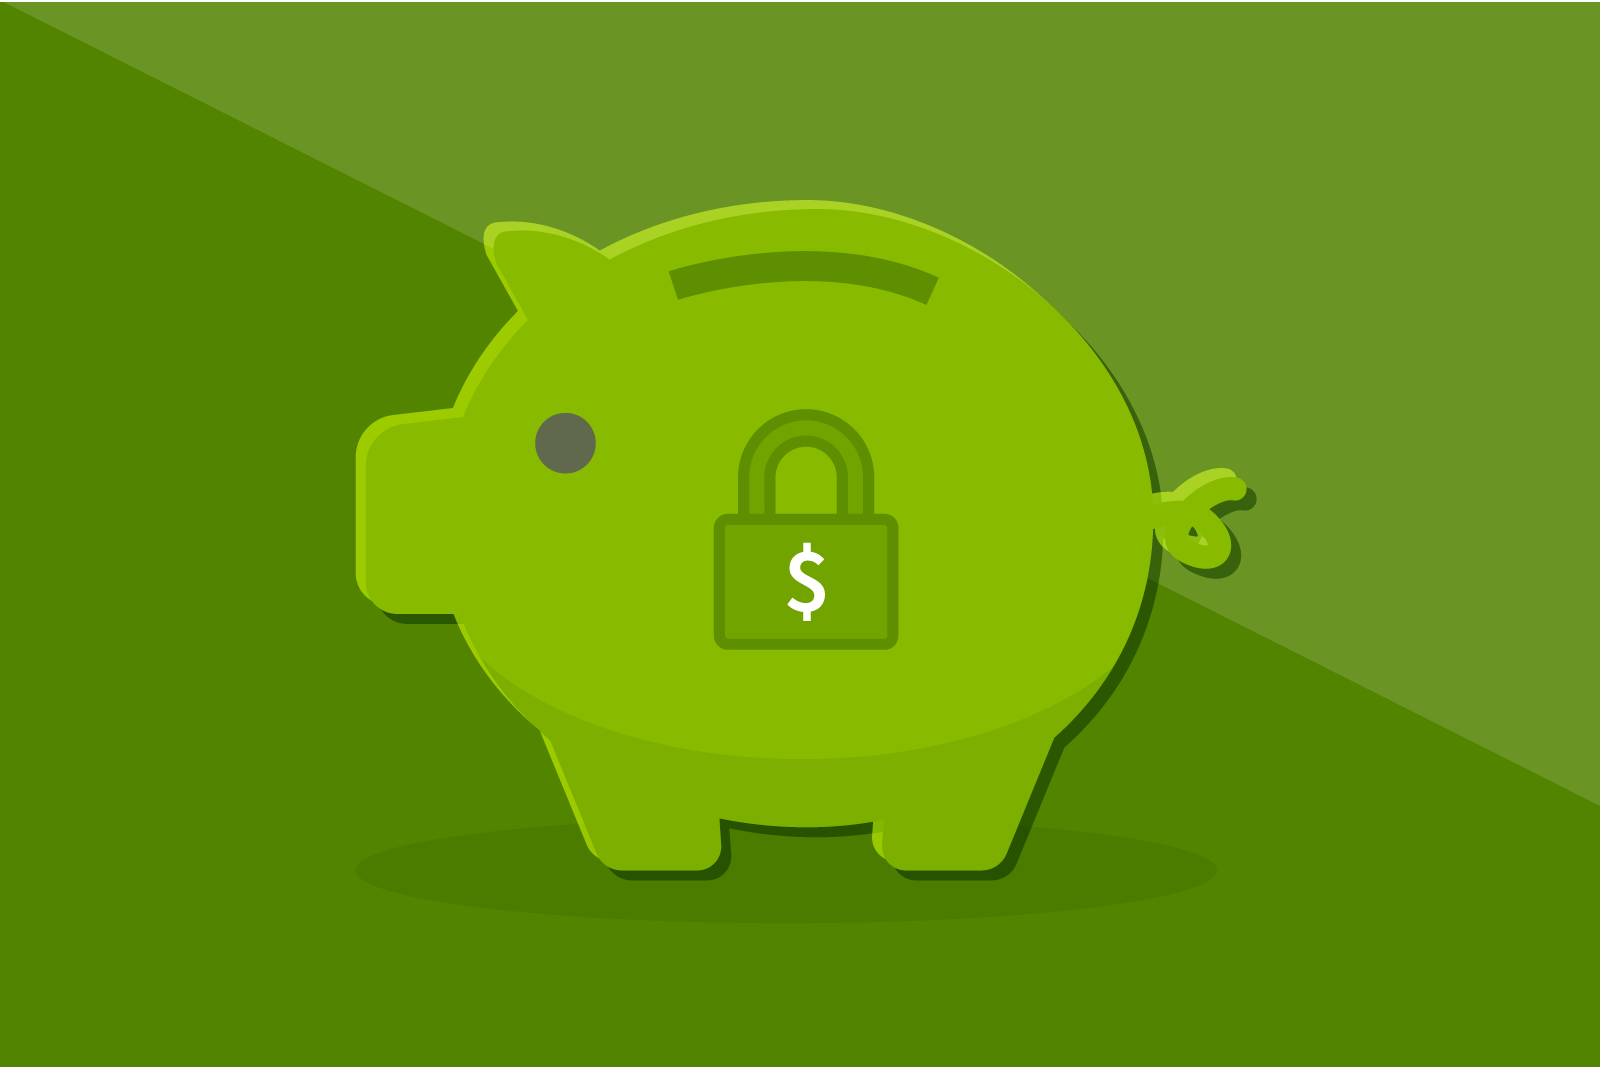 Illustration of Piggy Bank with a padlock